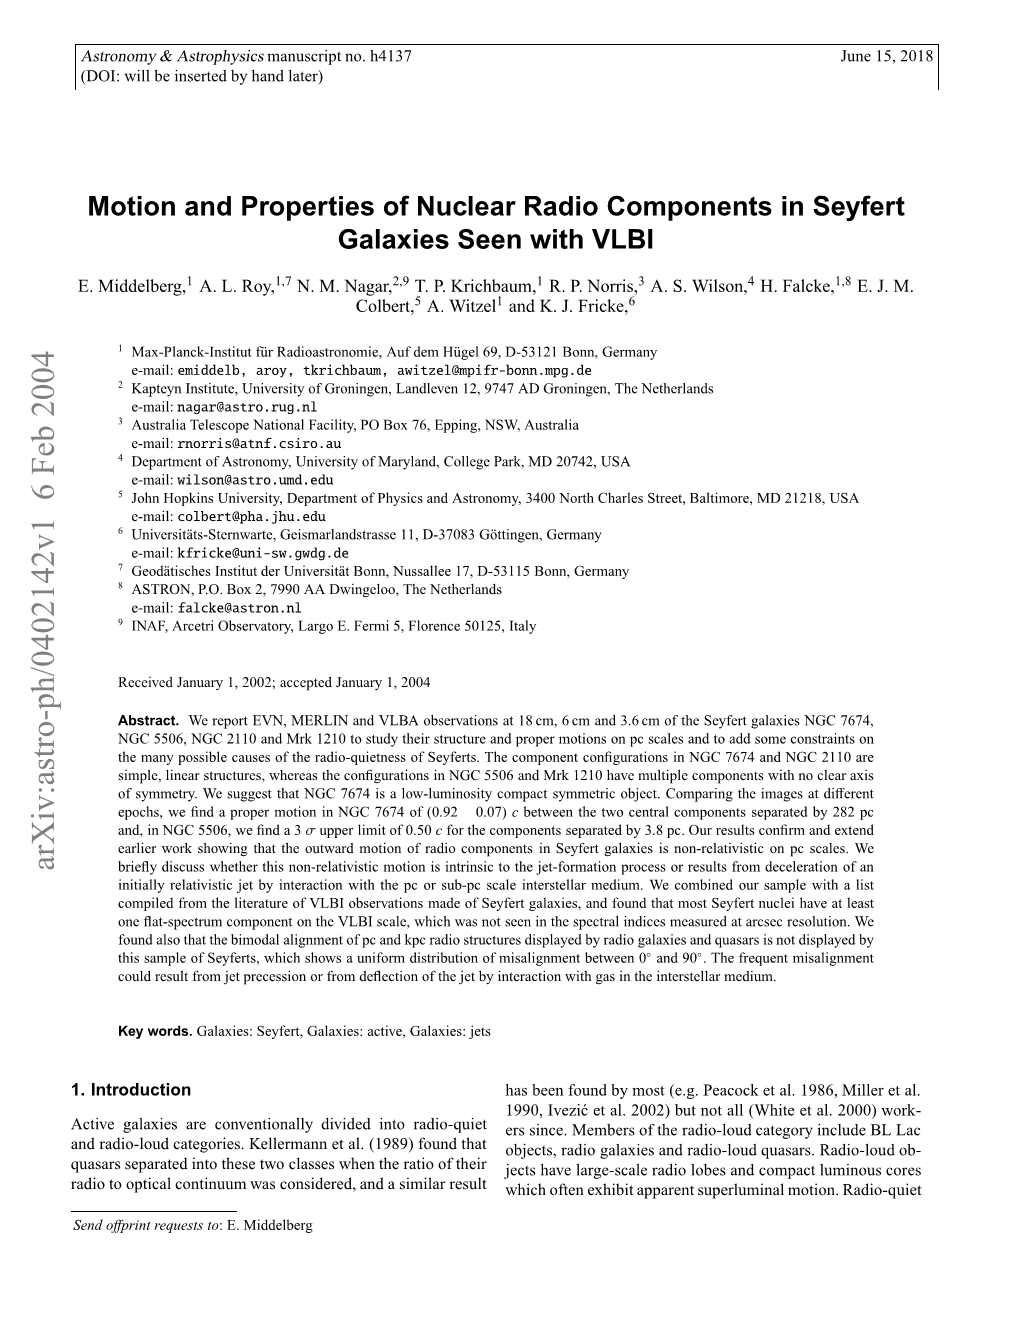 Motion and Properties of Nuclear Radio Components in Seyfert Galaxies Seen with VLBI